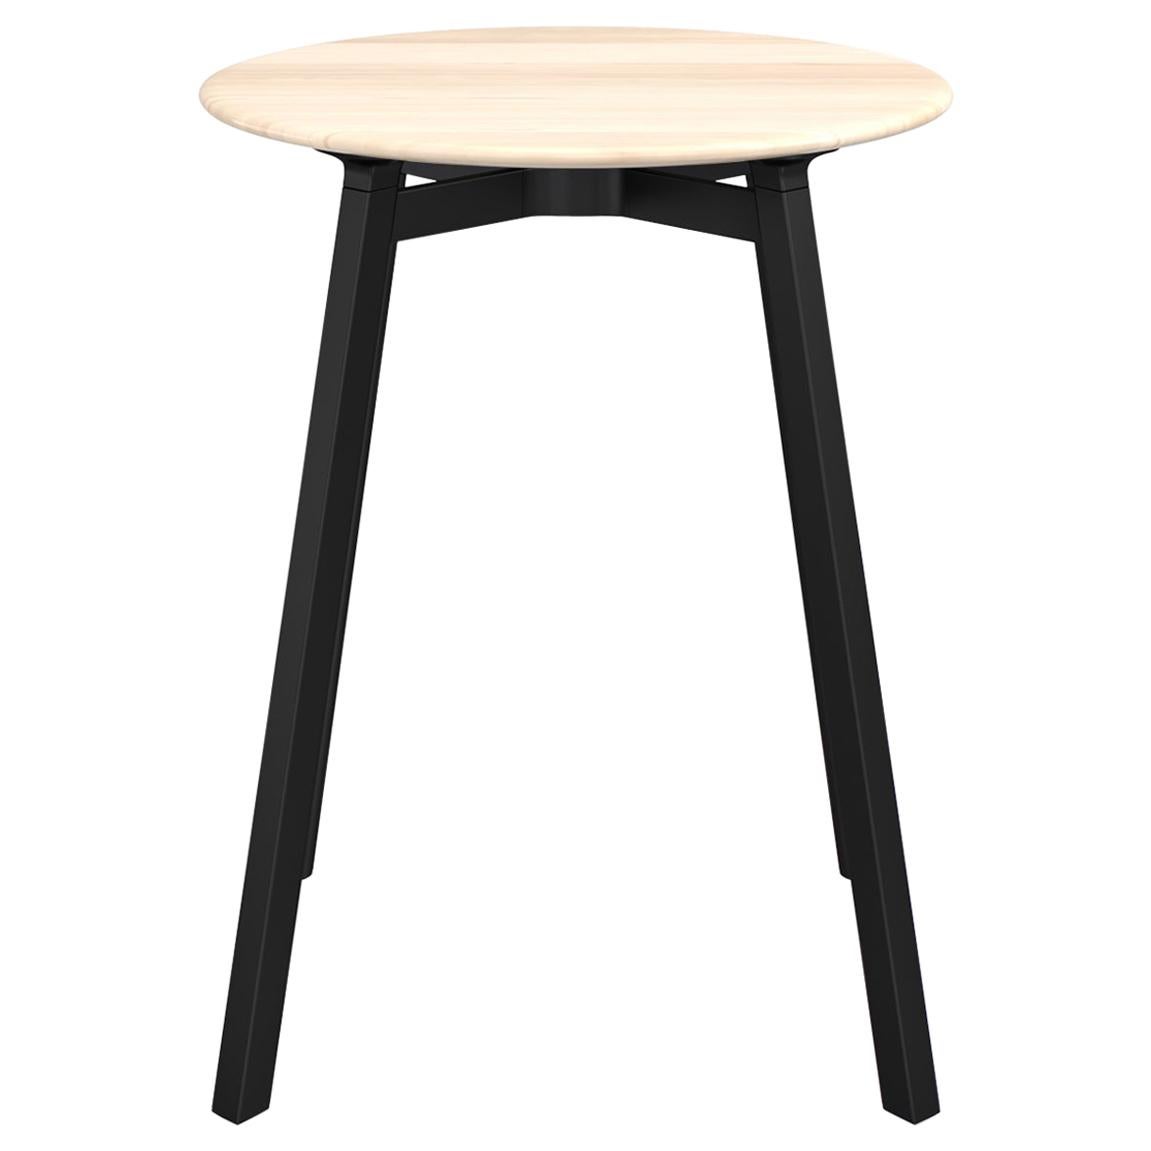 Emeco Su Small Round Cafe Table with Black Anodized Frame & Wood Top by Nendo For Sale